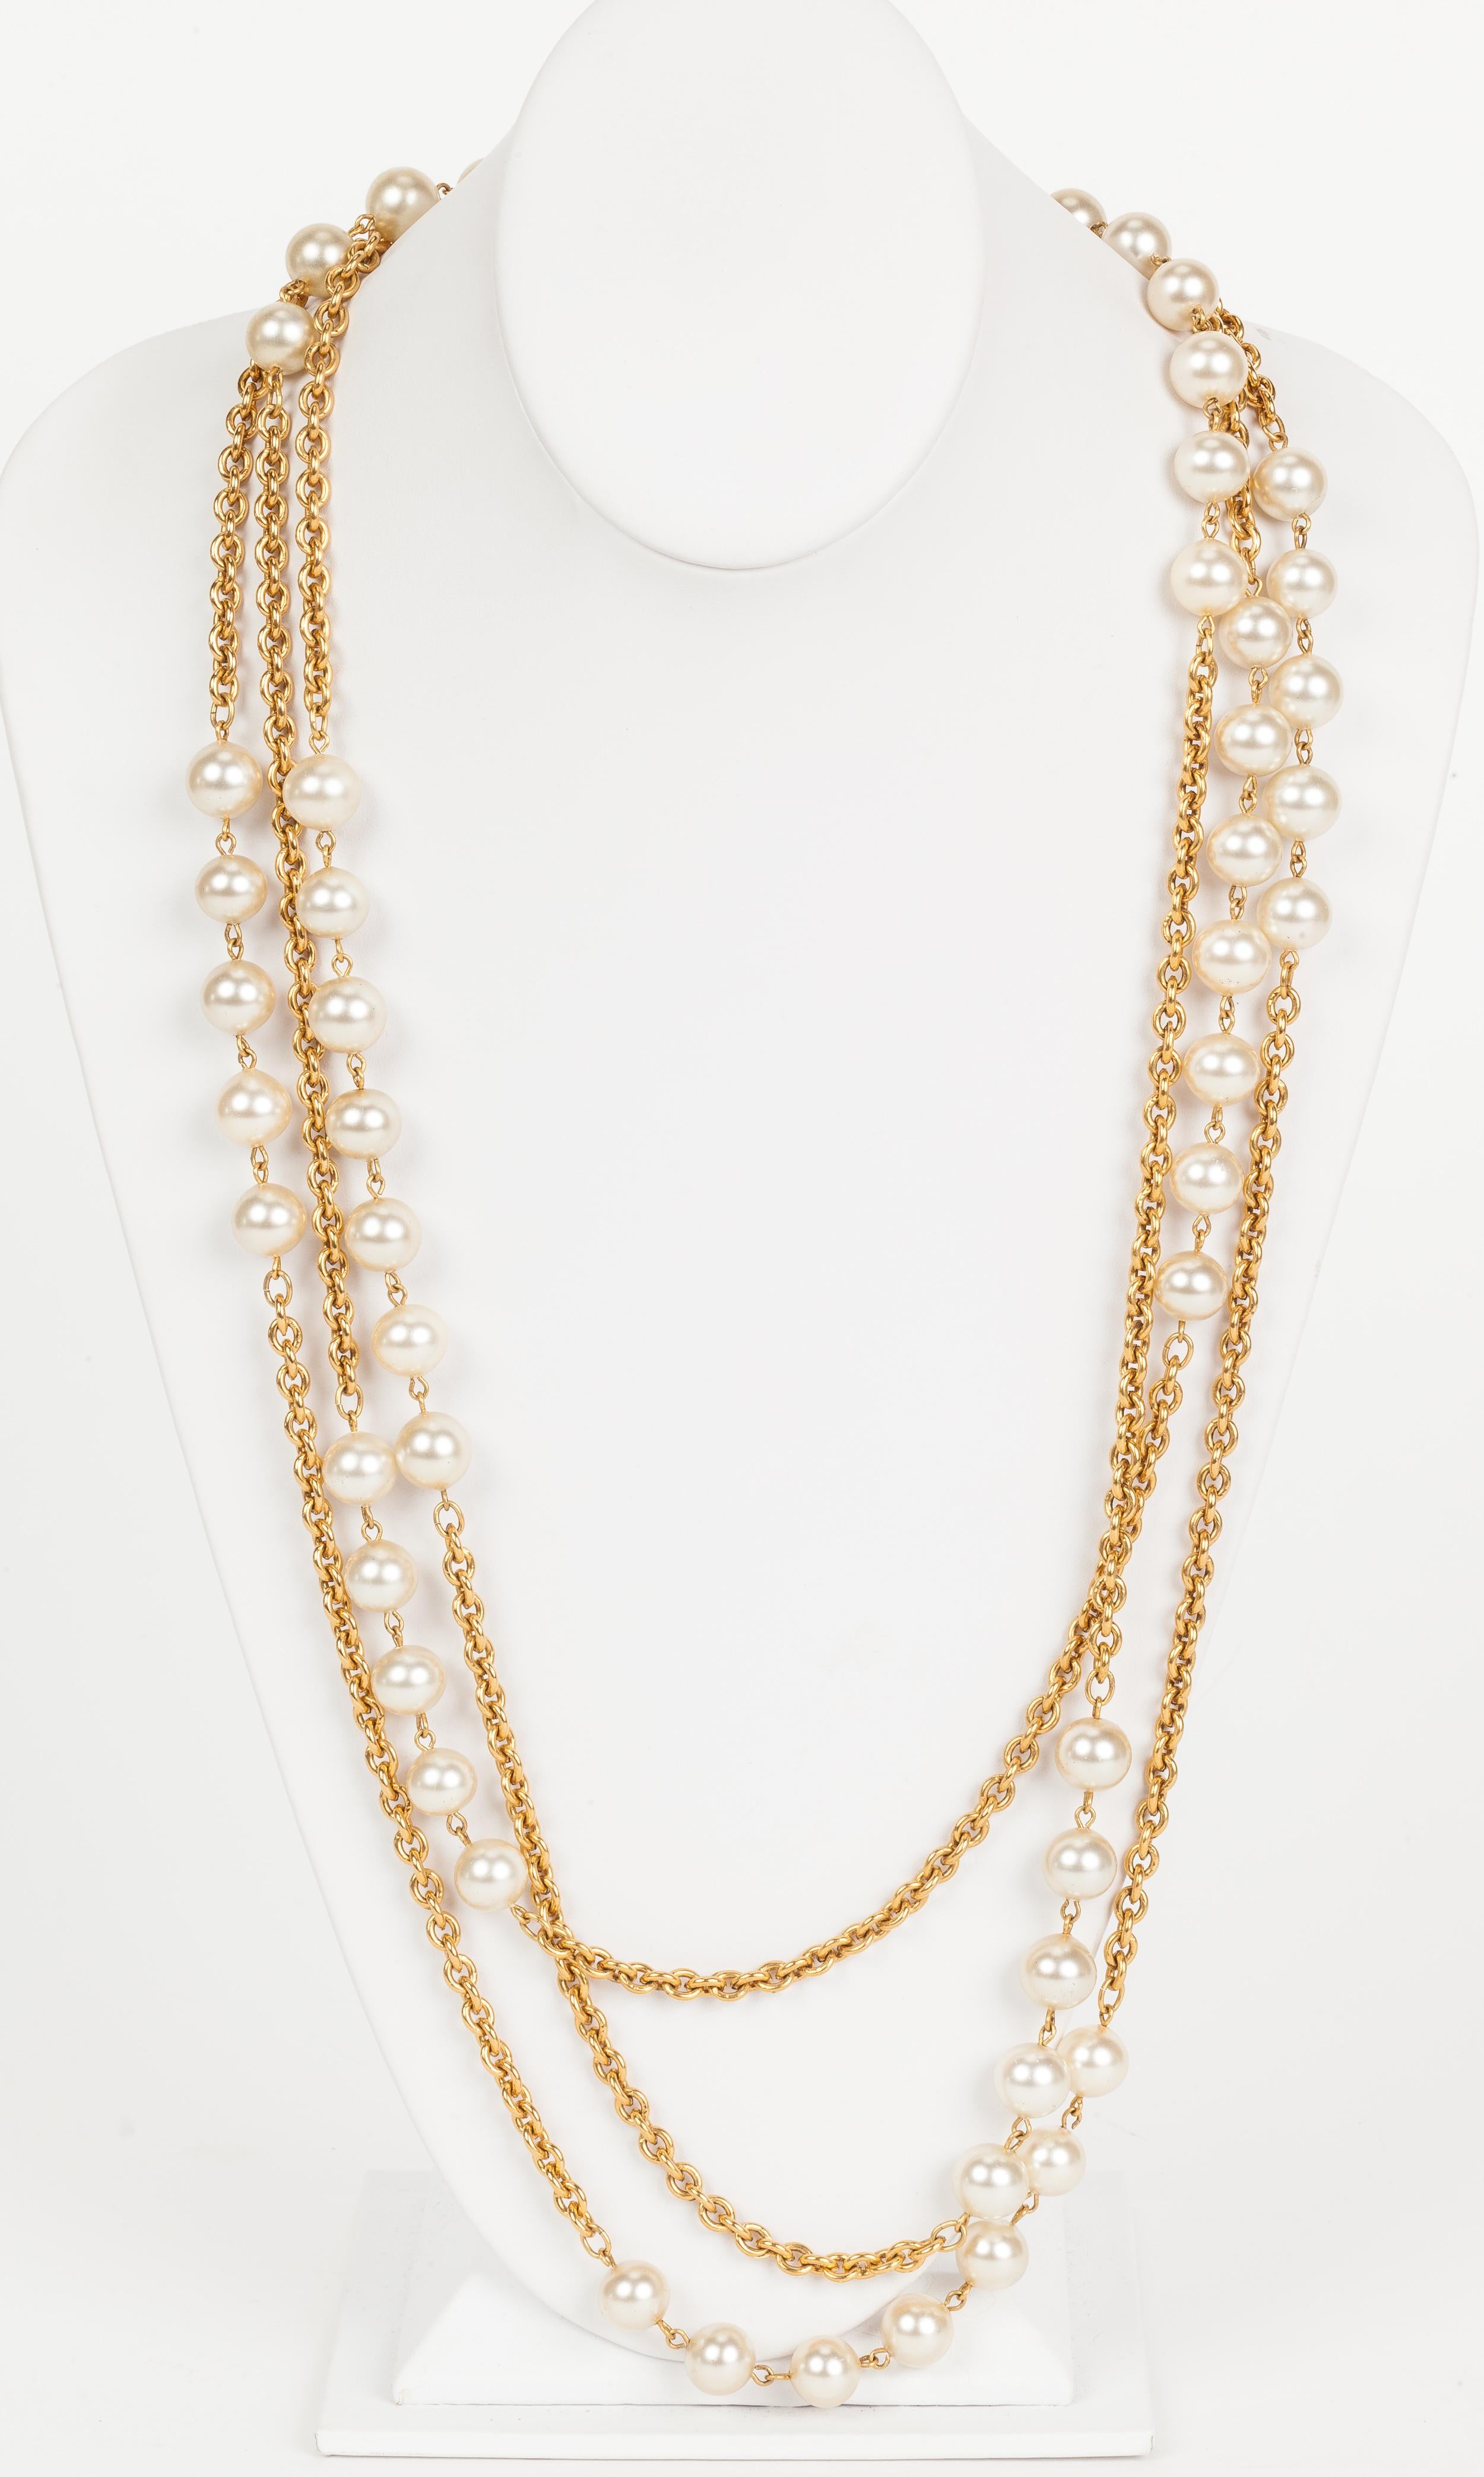 This super chic Chanel necklace is made of three separate strands of alternating pearl and rolo chain design. The longest strand boasts a 19